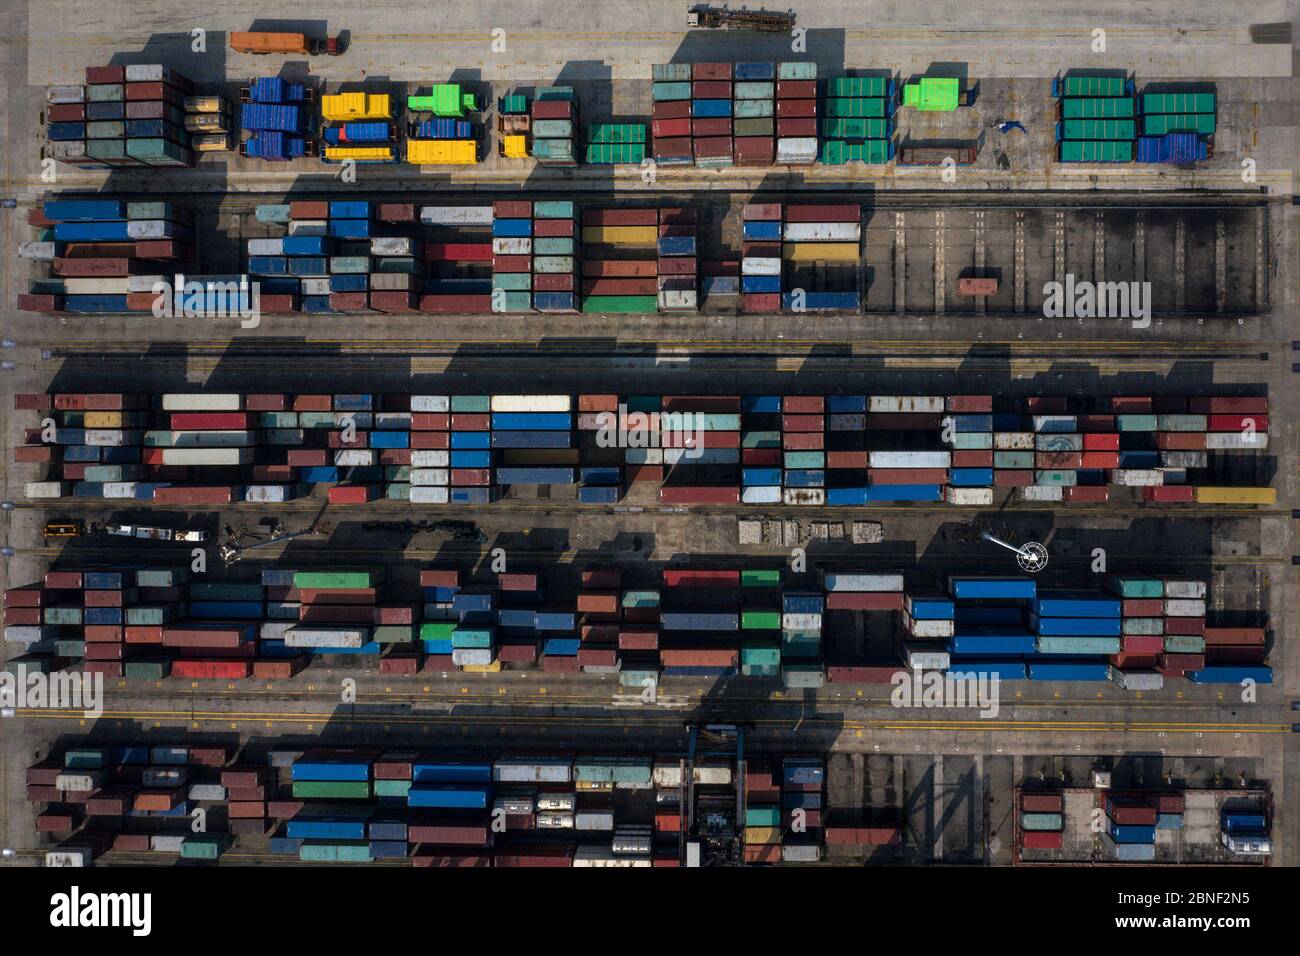 Containers are arrayed waiting to be delivered by cargo vessels at a port, Wuhan city, central China's Hubei province, 30 April 2020. *** Local Captio Stock Photo